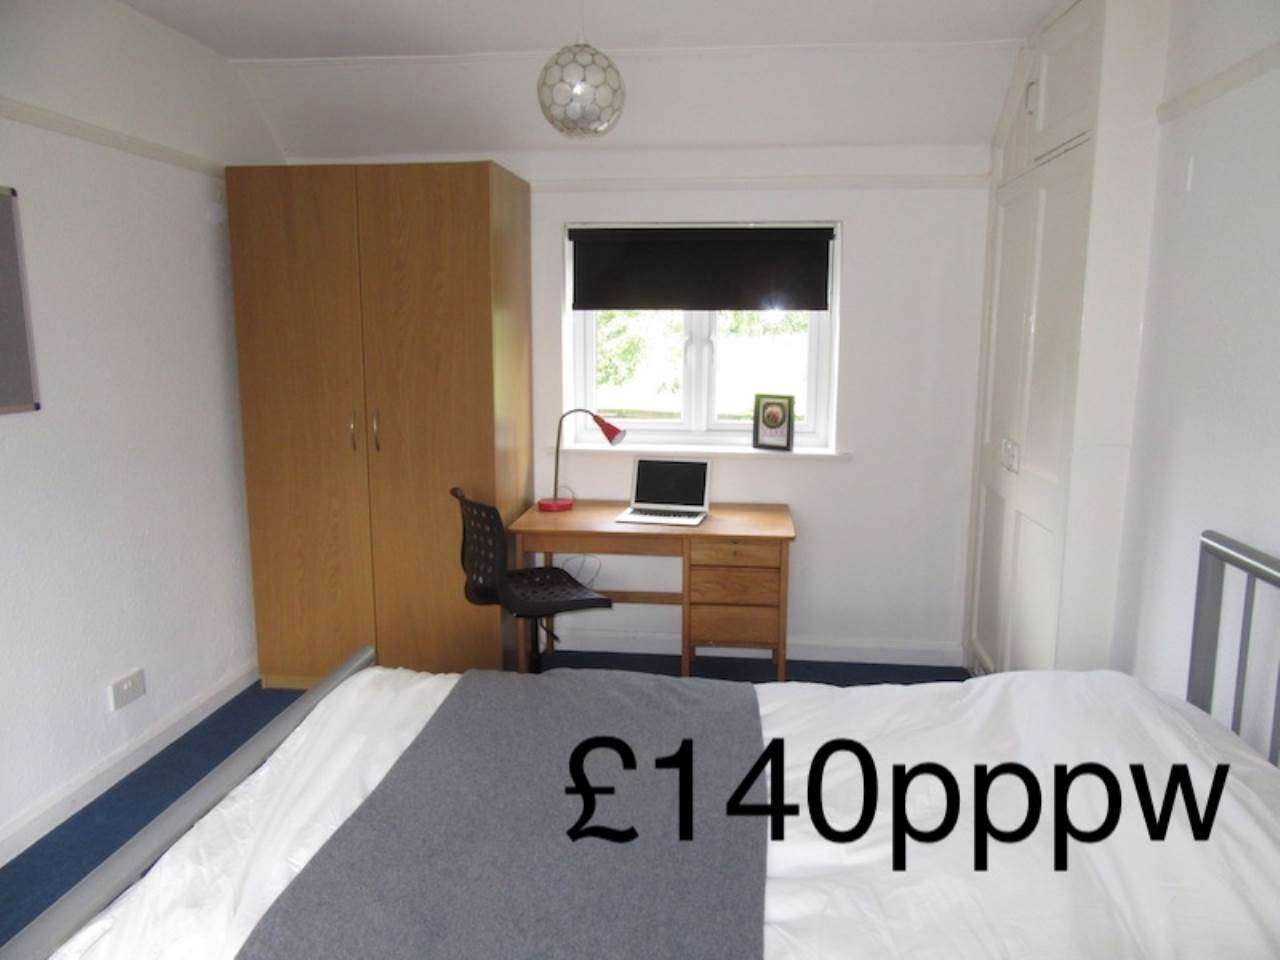 3 bed terraced house to rent in Alice Templer Close - Property Image 1